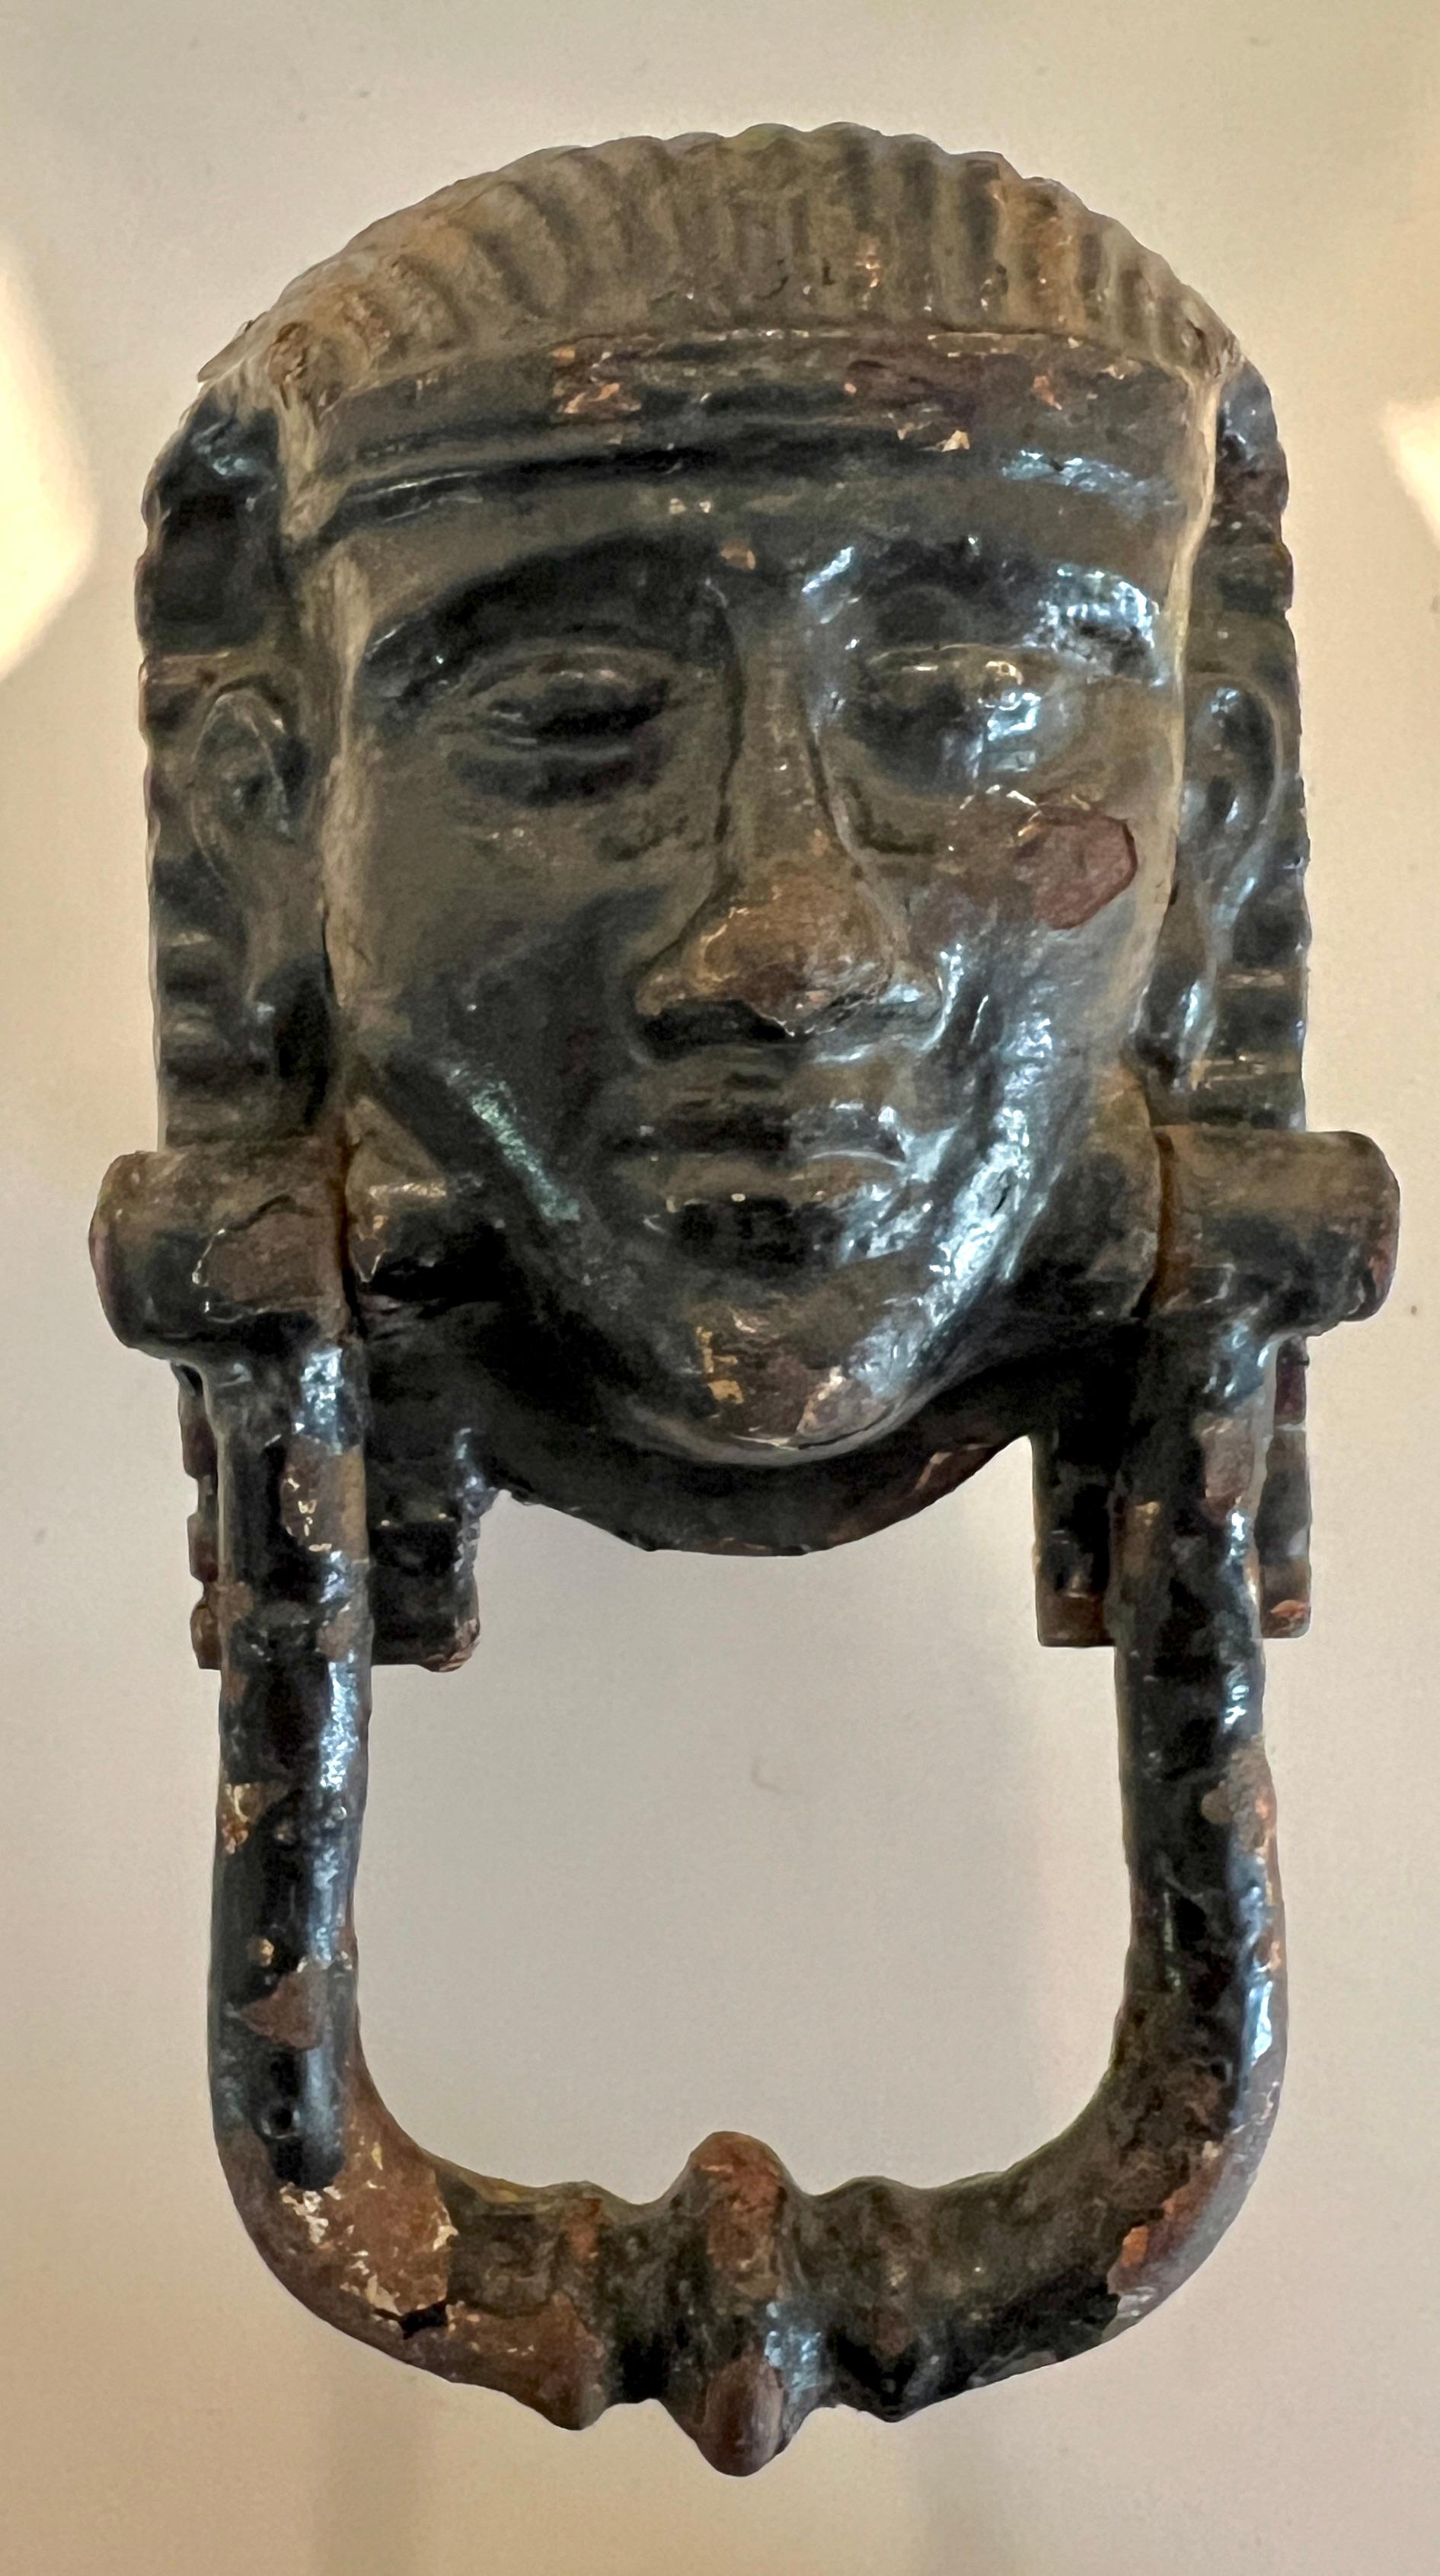 Cast Iron Door Knocker, circa 1900, London England.  

The cast iron knocker is heavily patinated and in the shape of a a Pharoah Head.  Acquired in the days when King Tutankhamun was at high popularity in Europe.  A compliant to many doors - from